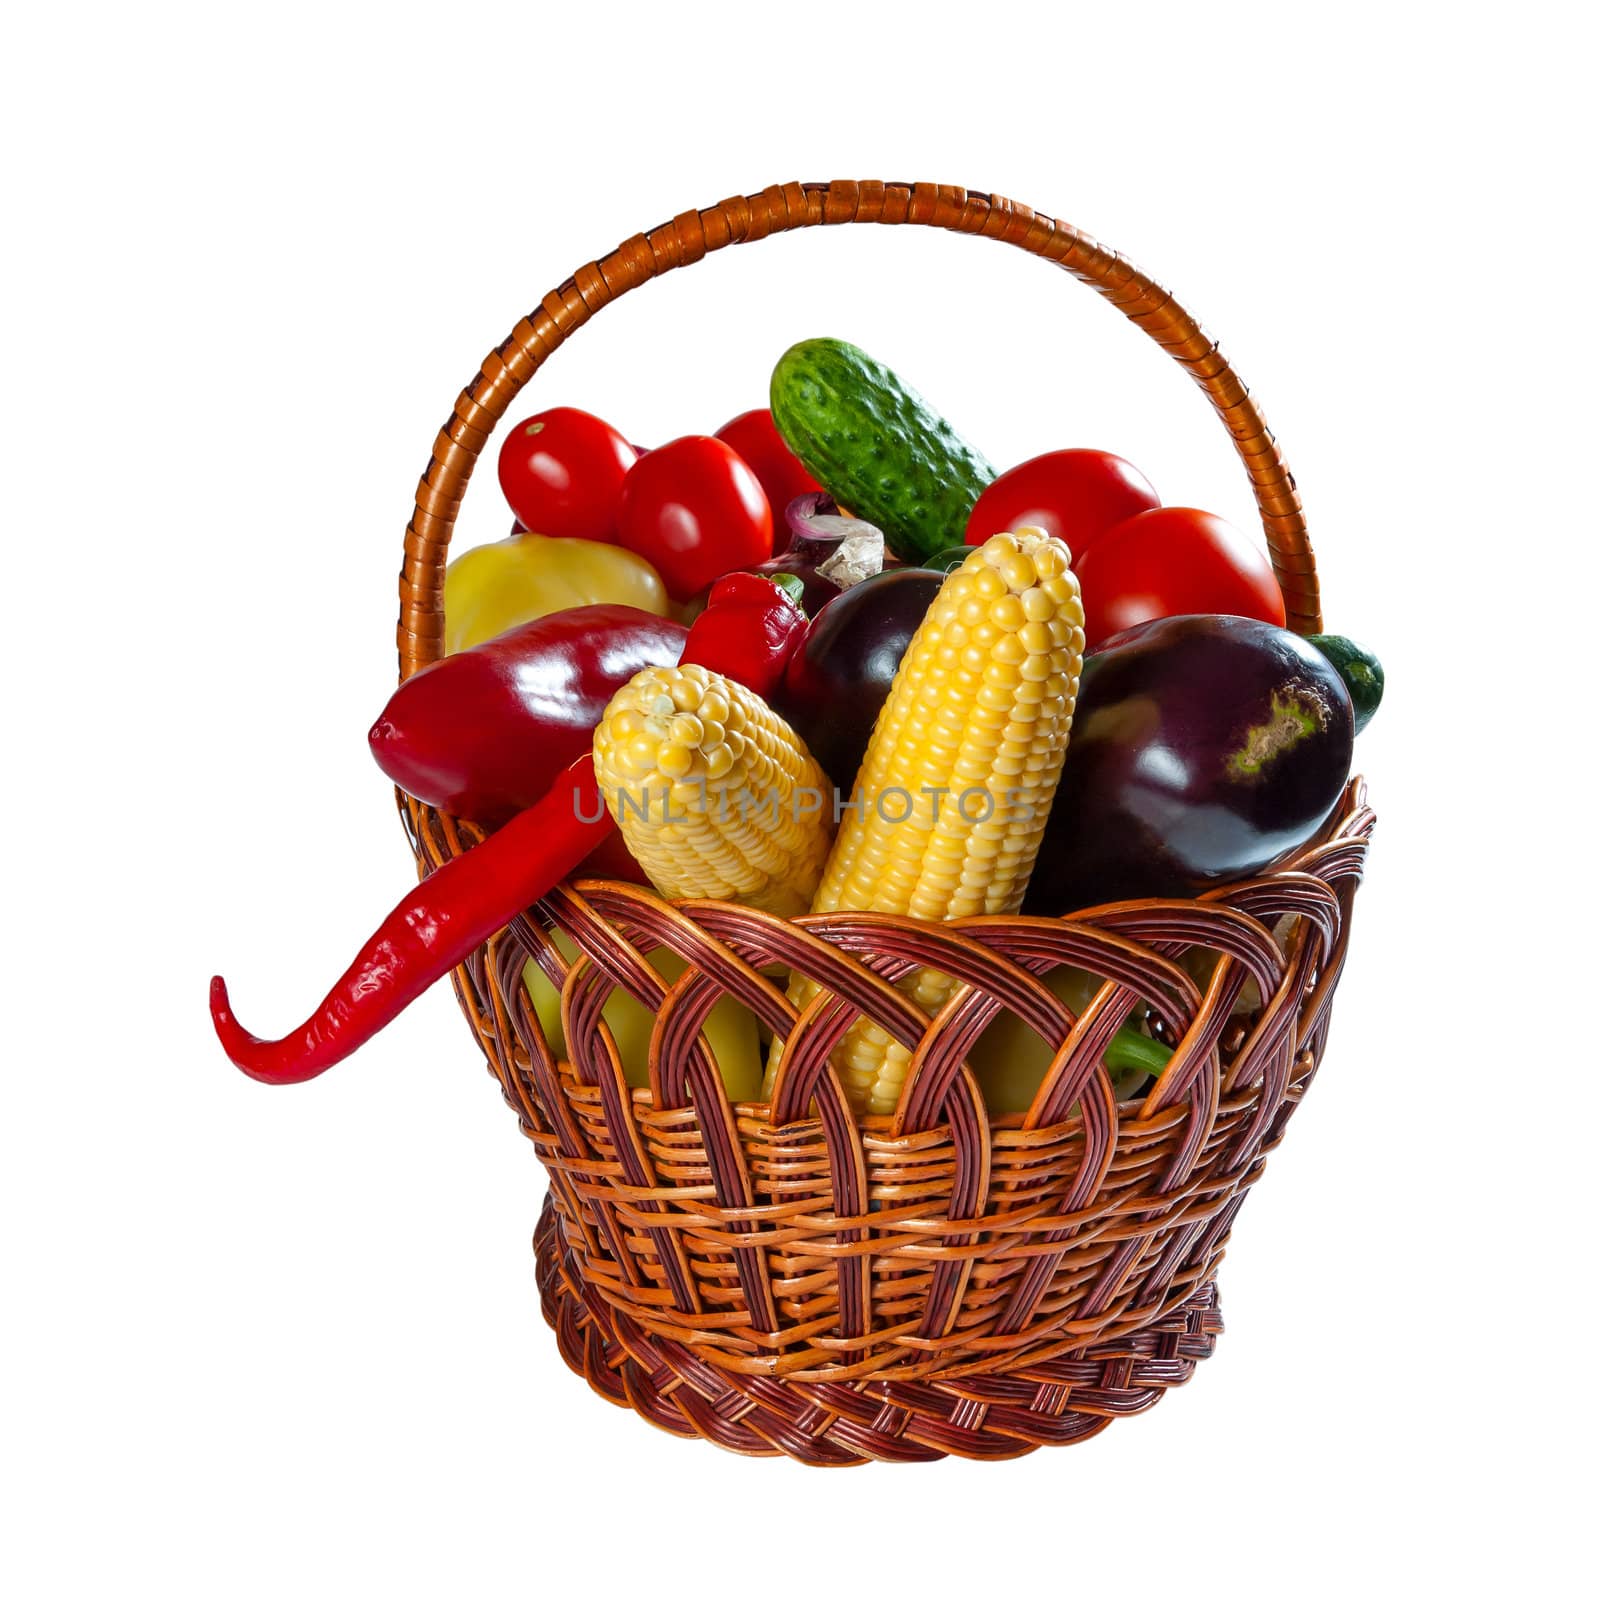 Different fresh vegetables in wicker basket isolated on a white background